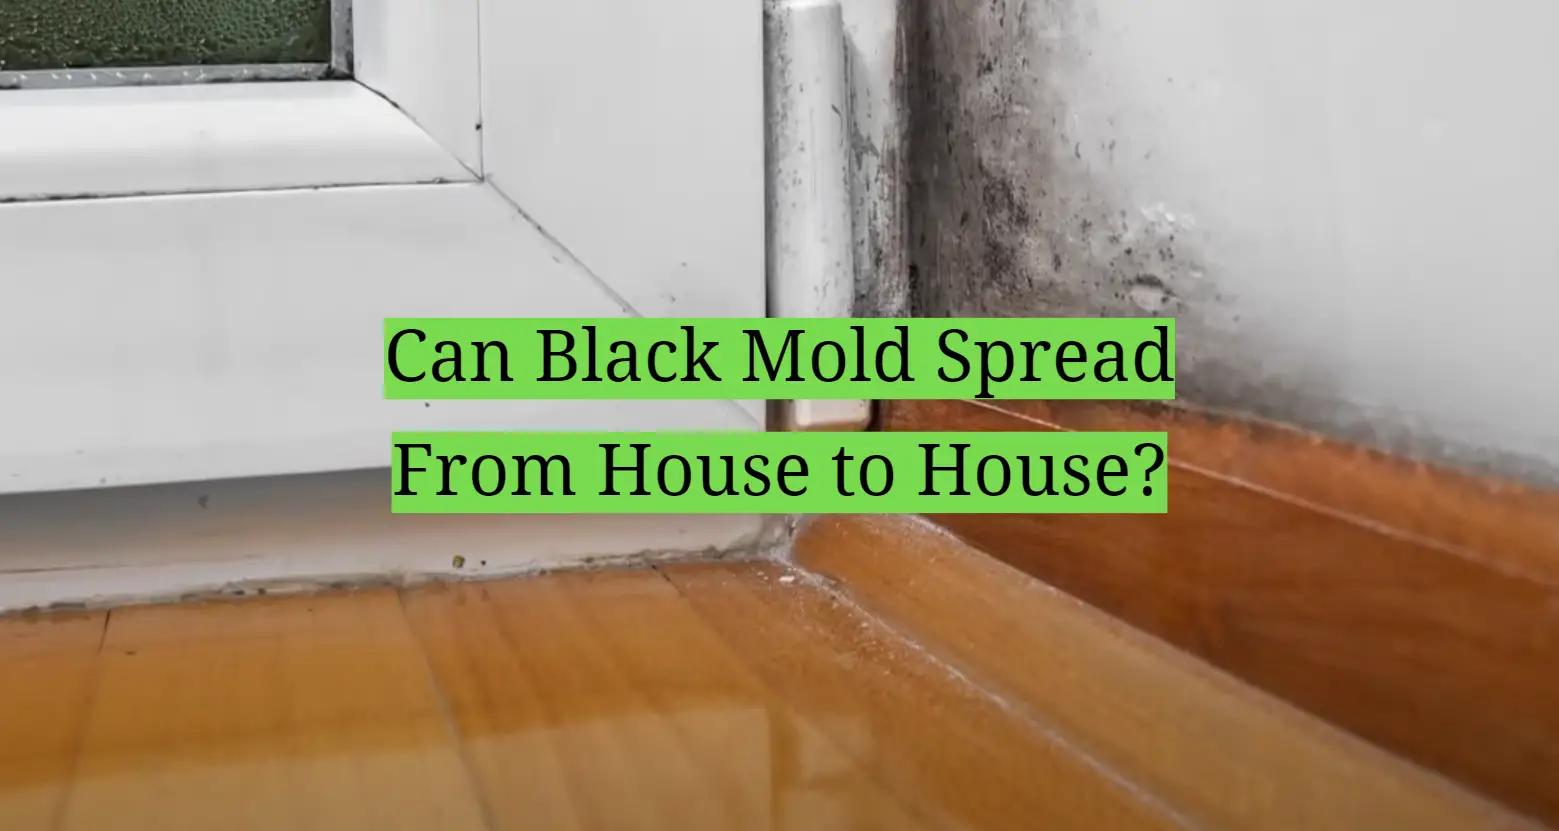 Can Black Mold Spread From House to House?